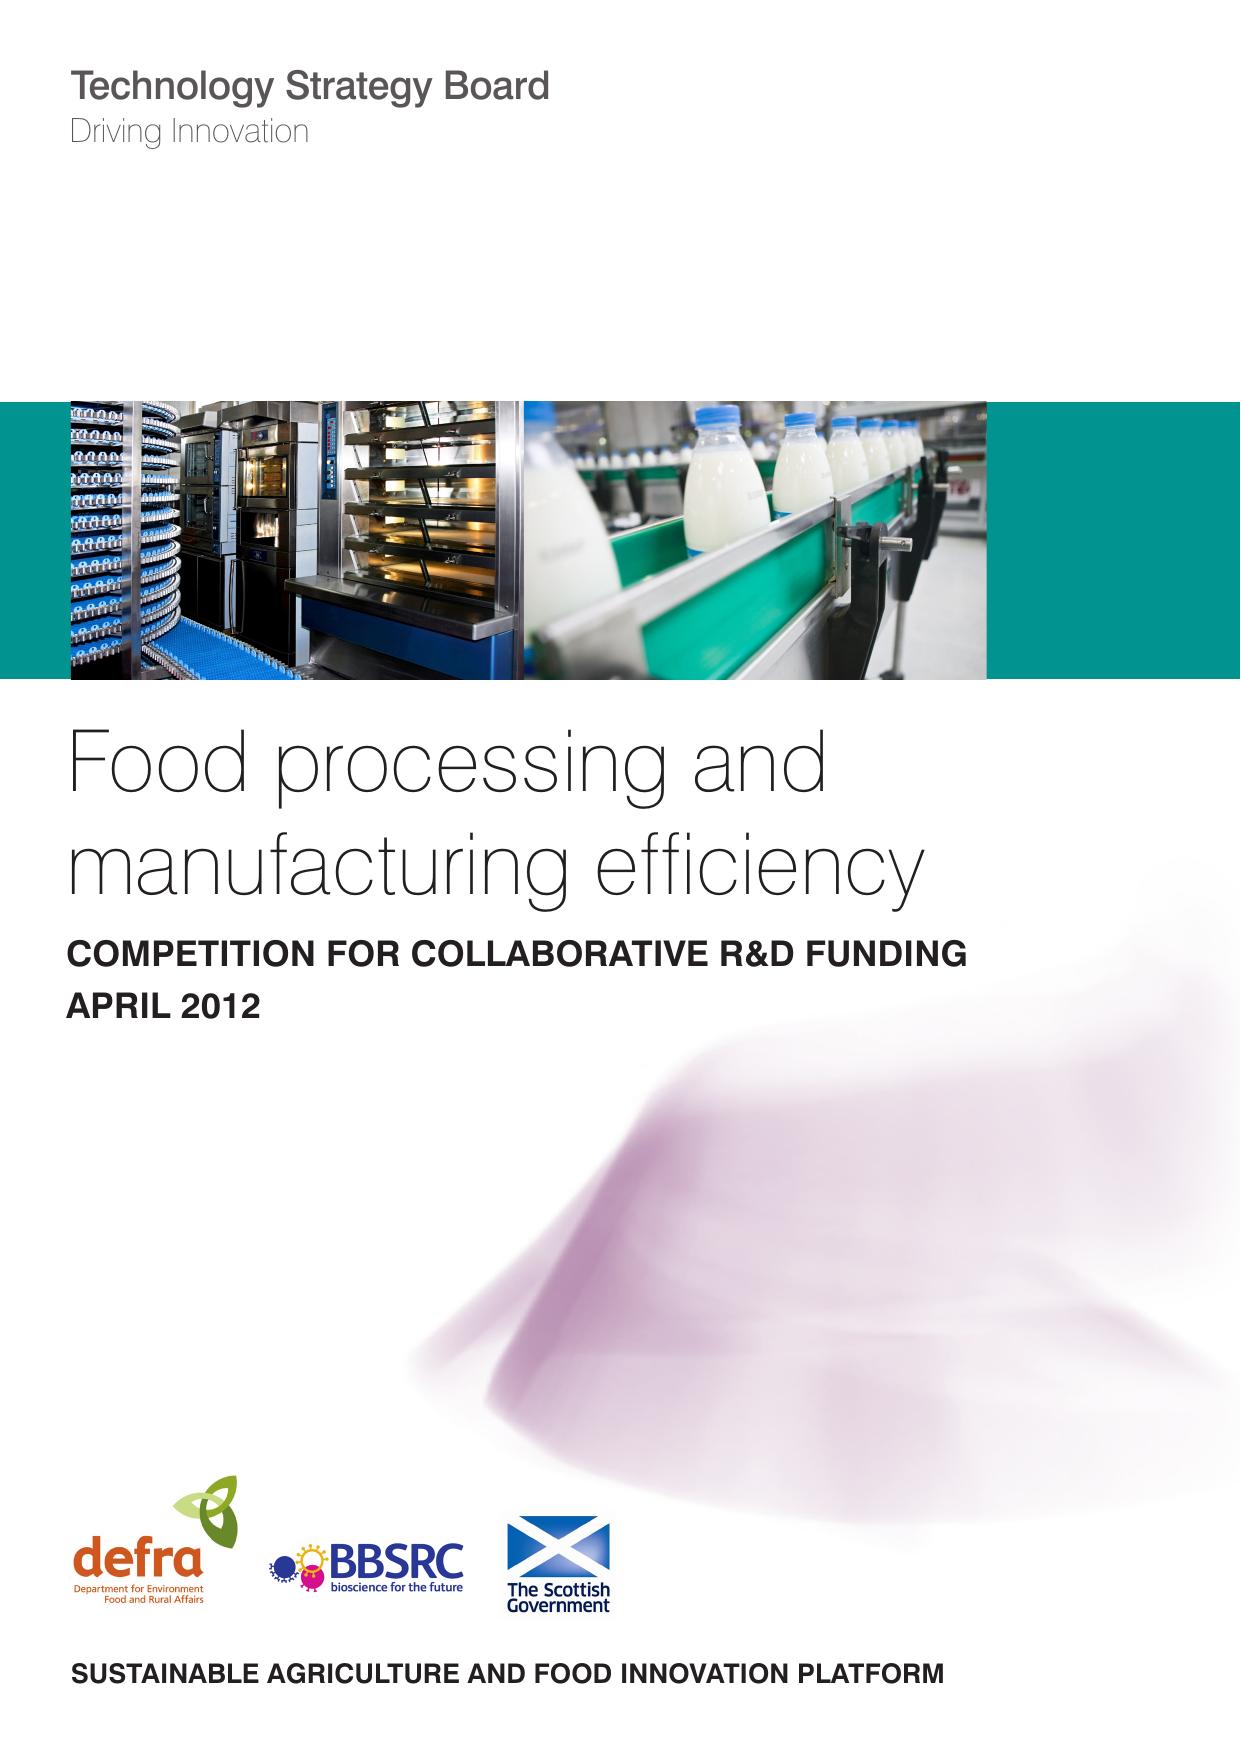 Food processing and manufacturing efficiency 2012